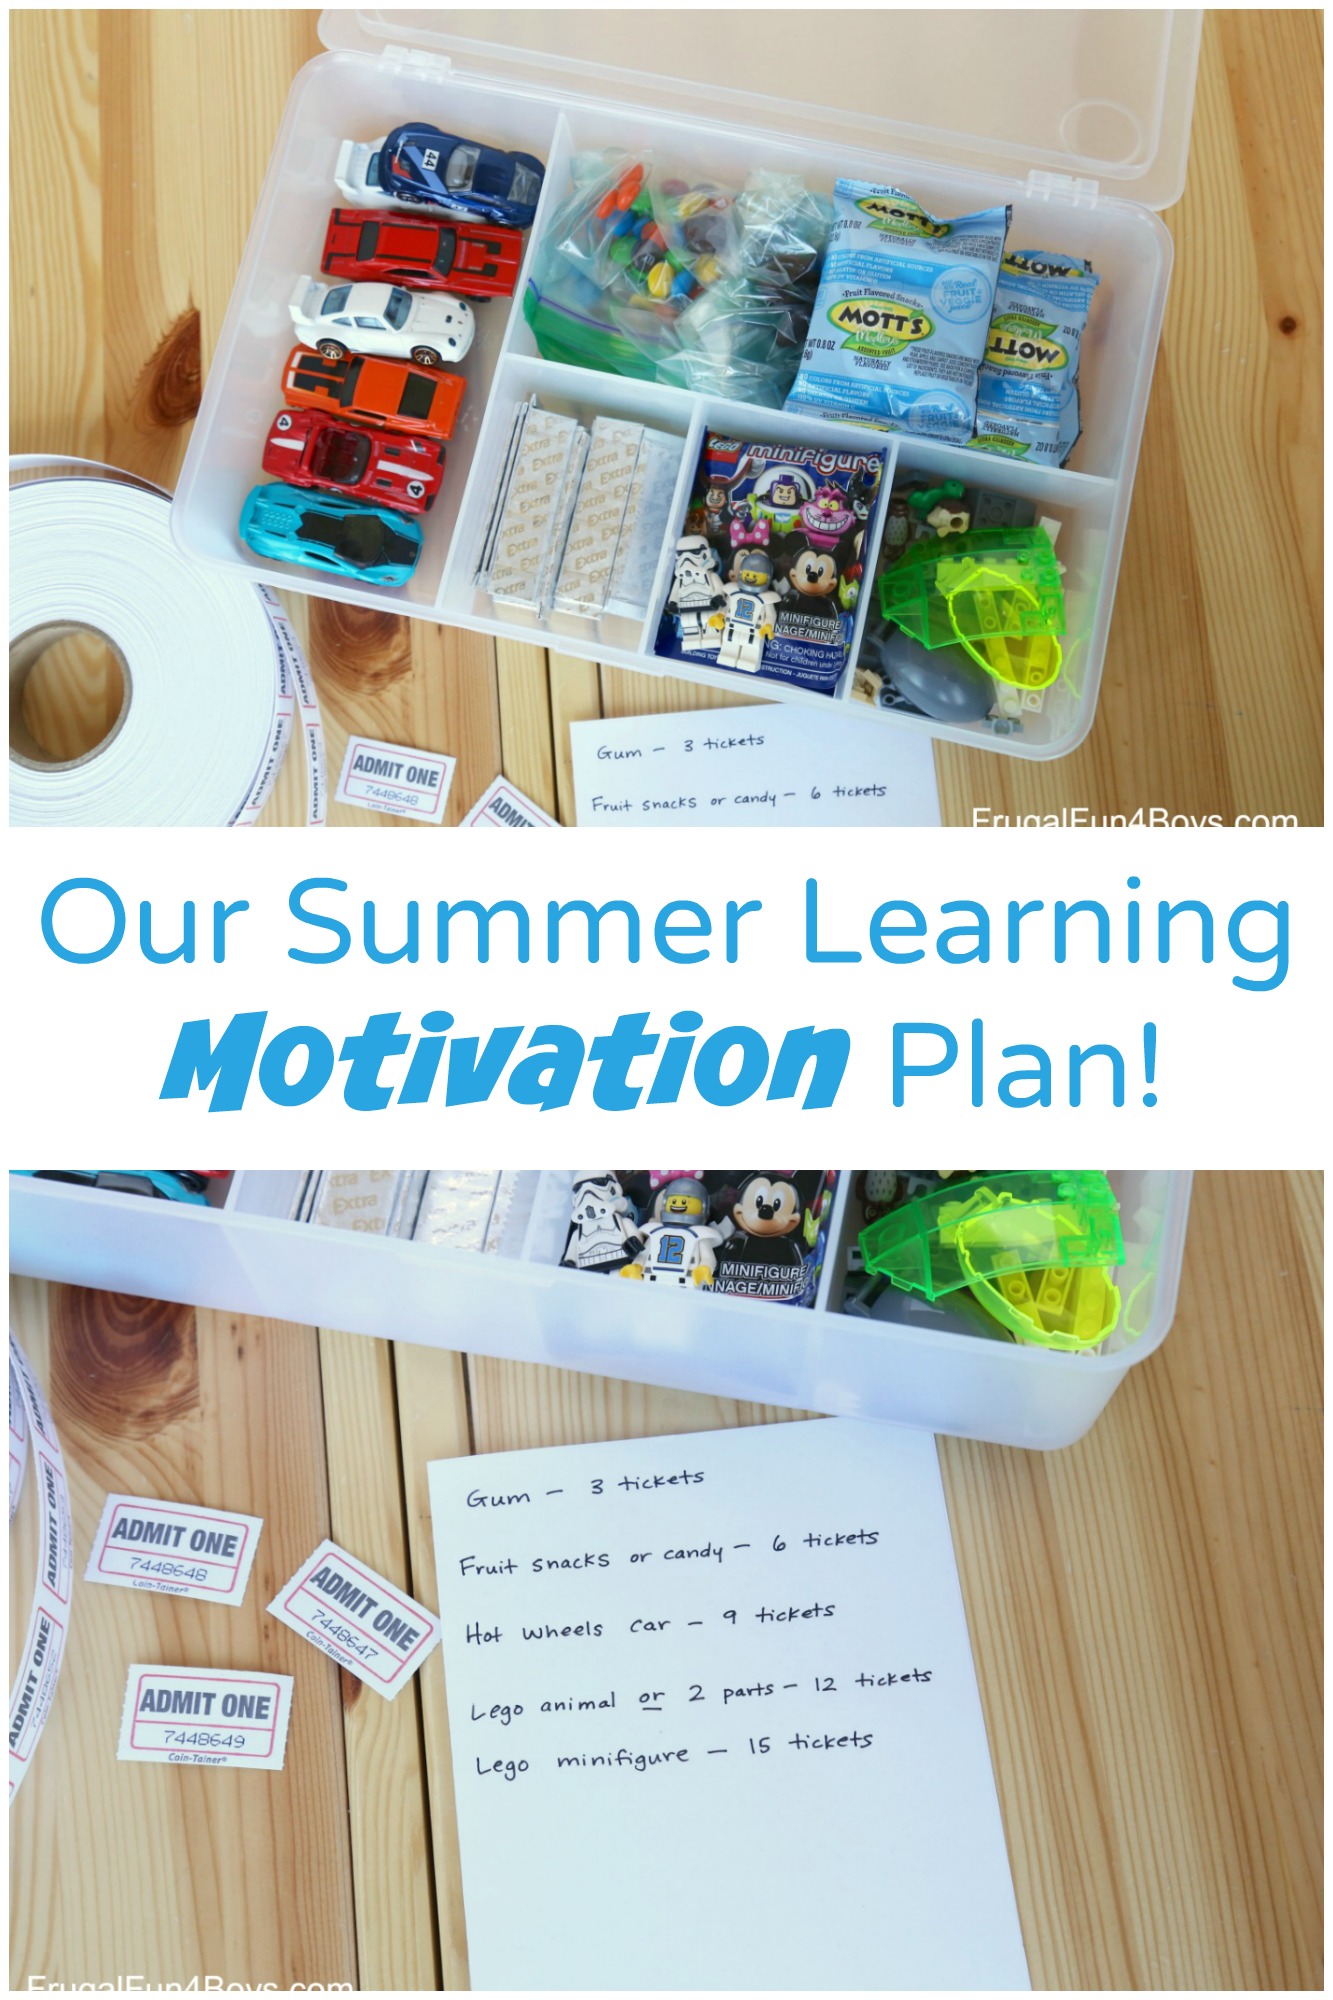 Our Summer Learning Motivation Plan